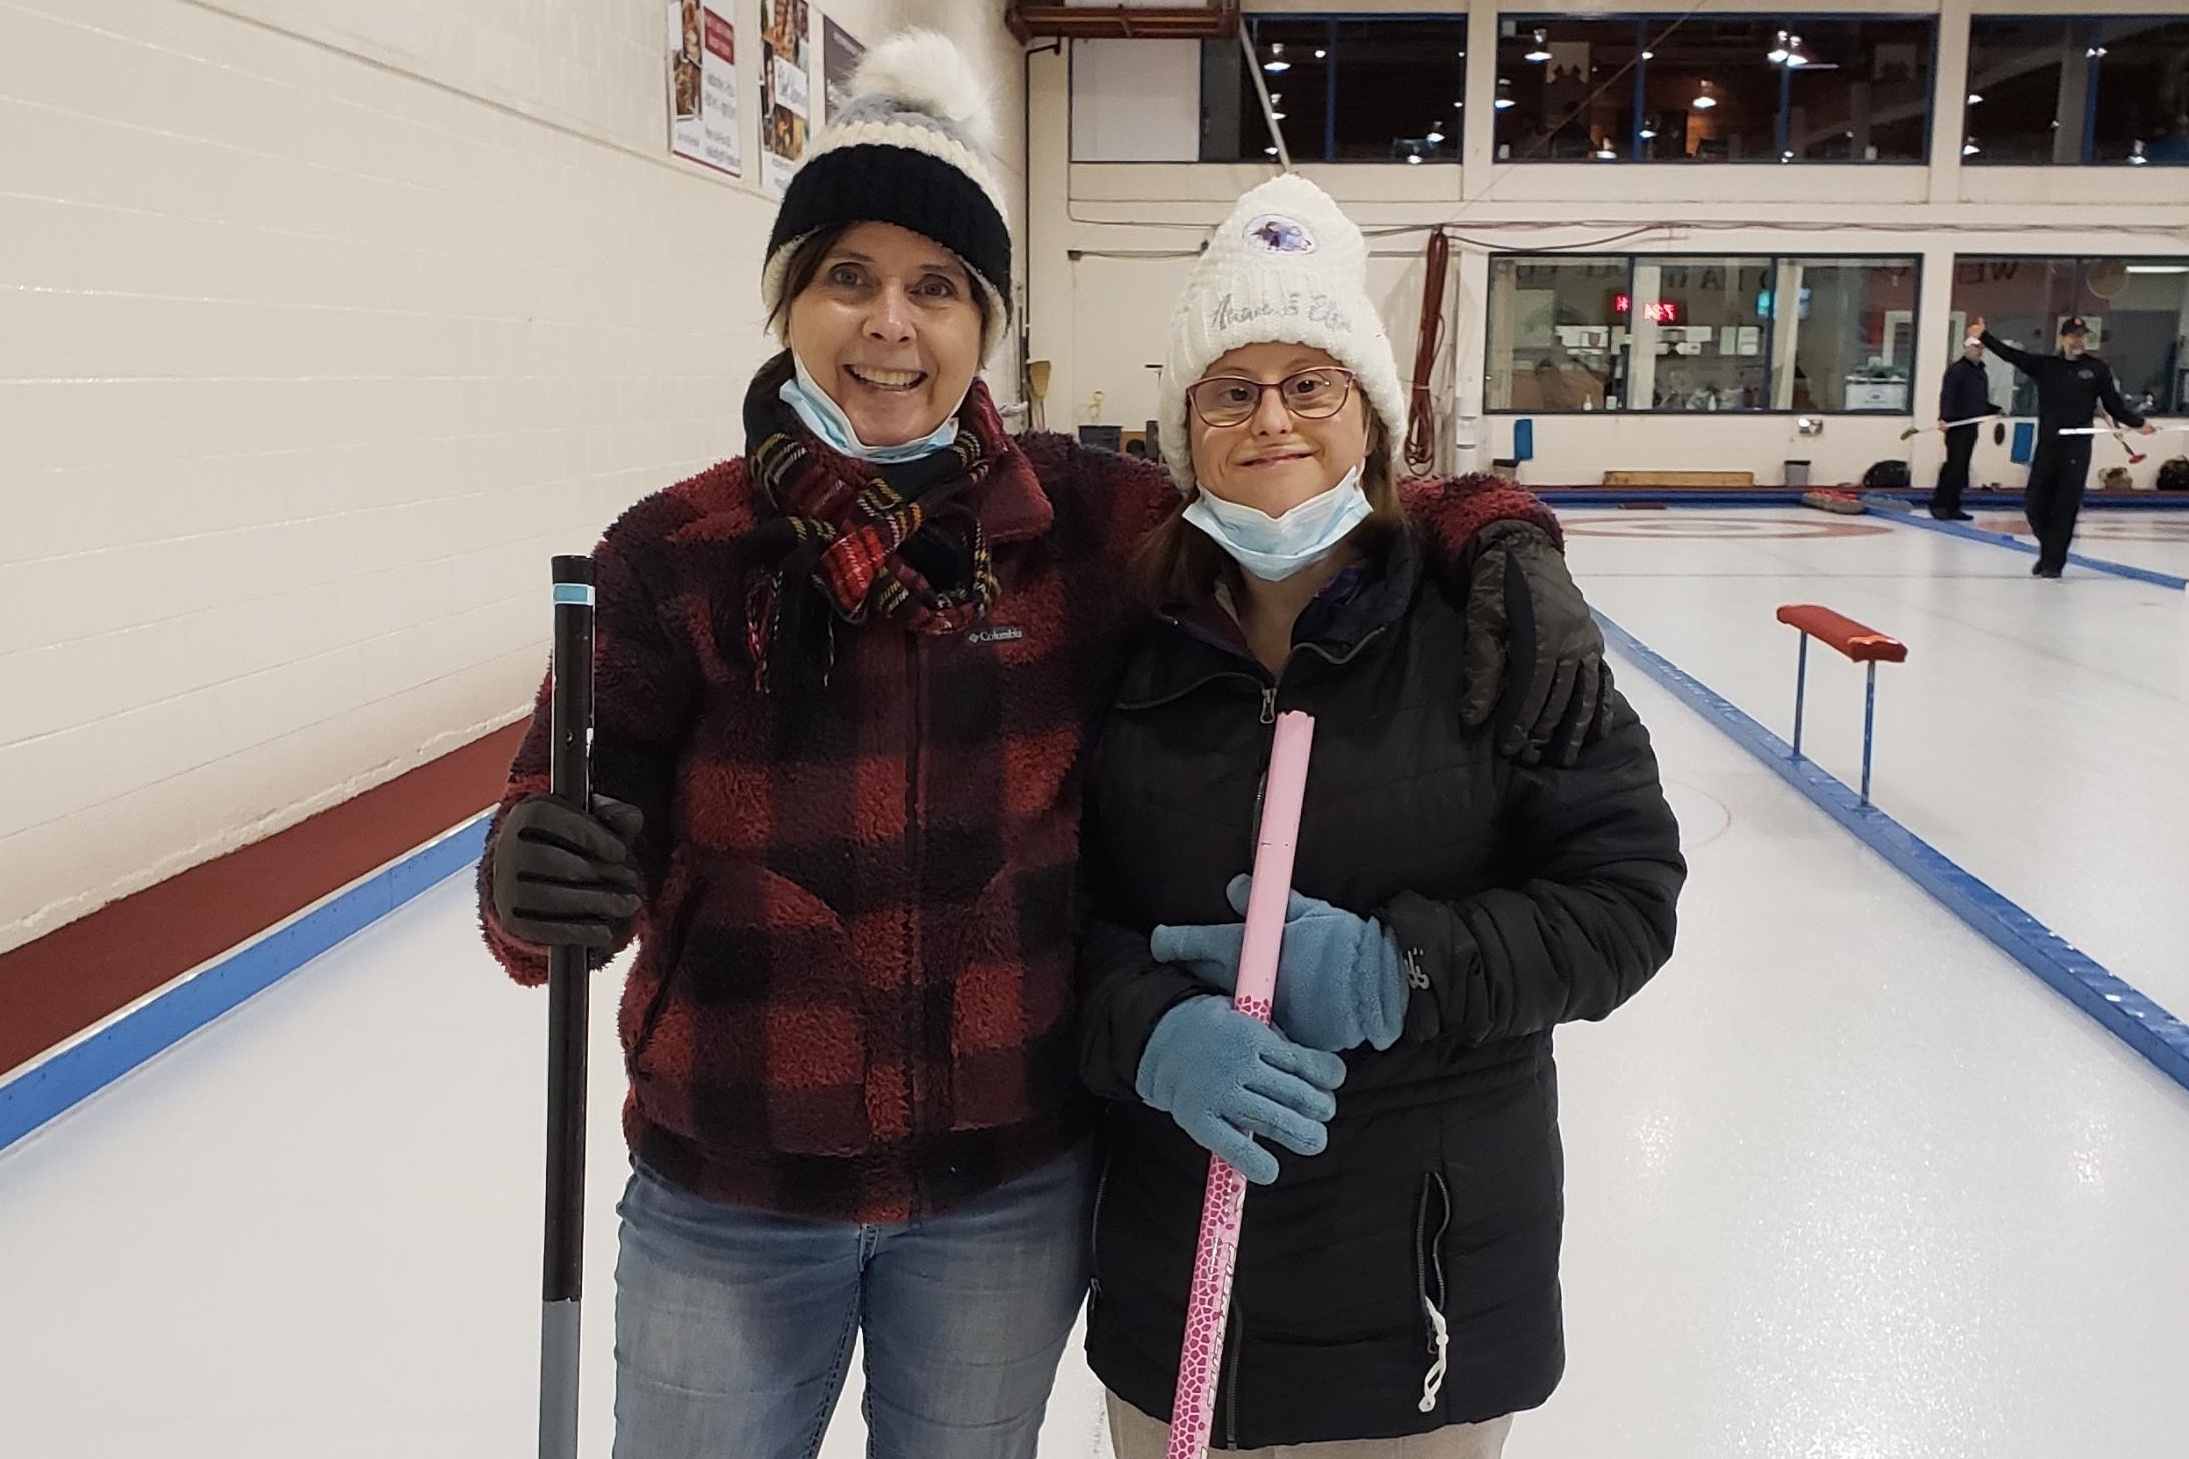 Two Women Standing on a Curling Rink